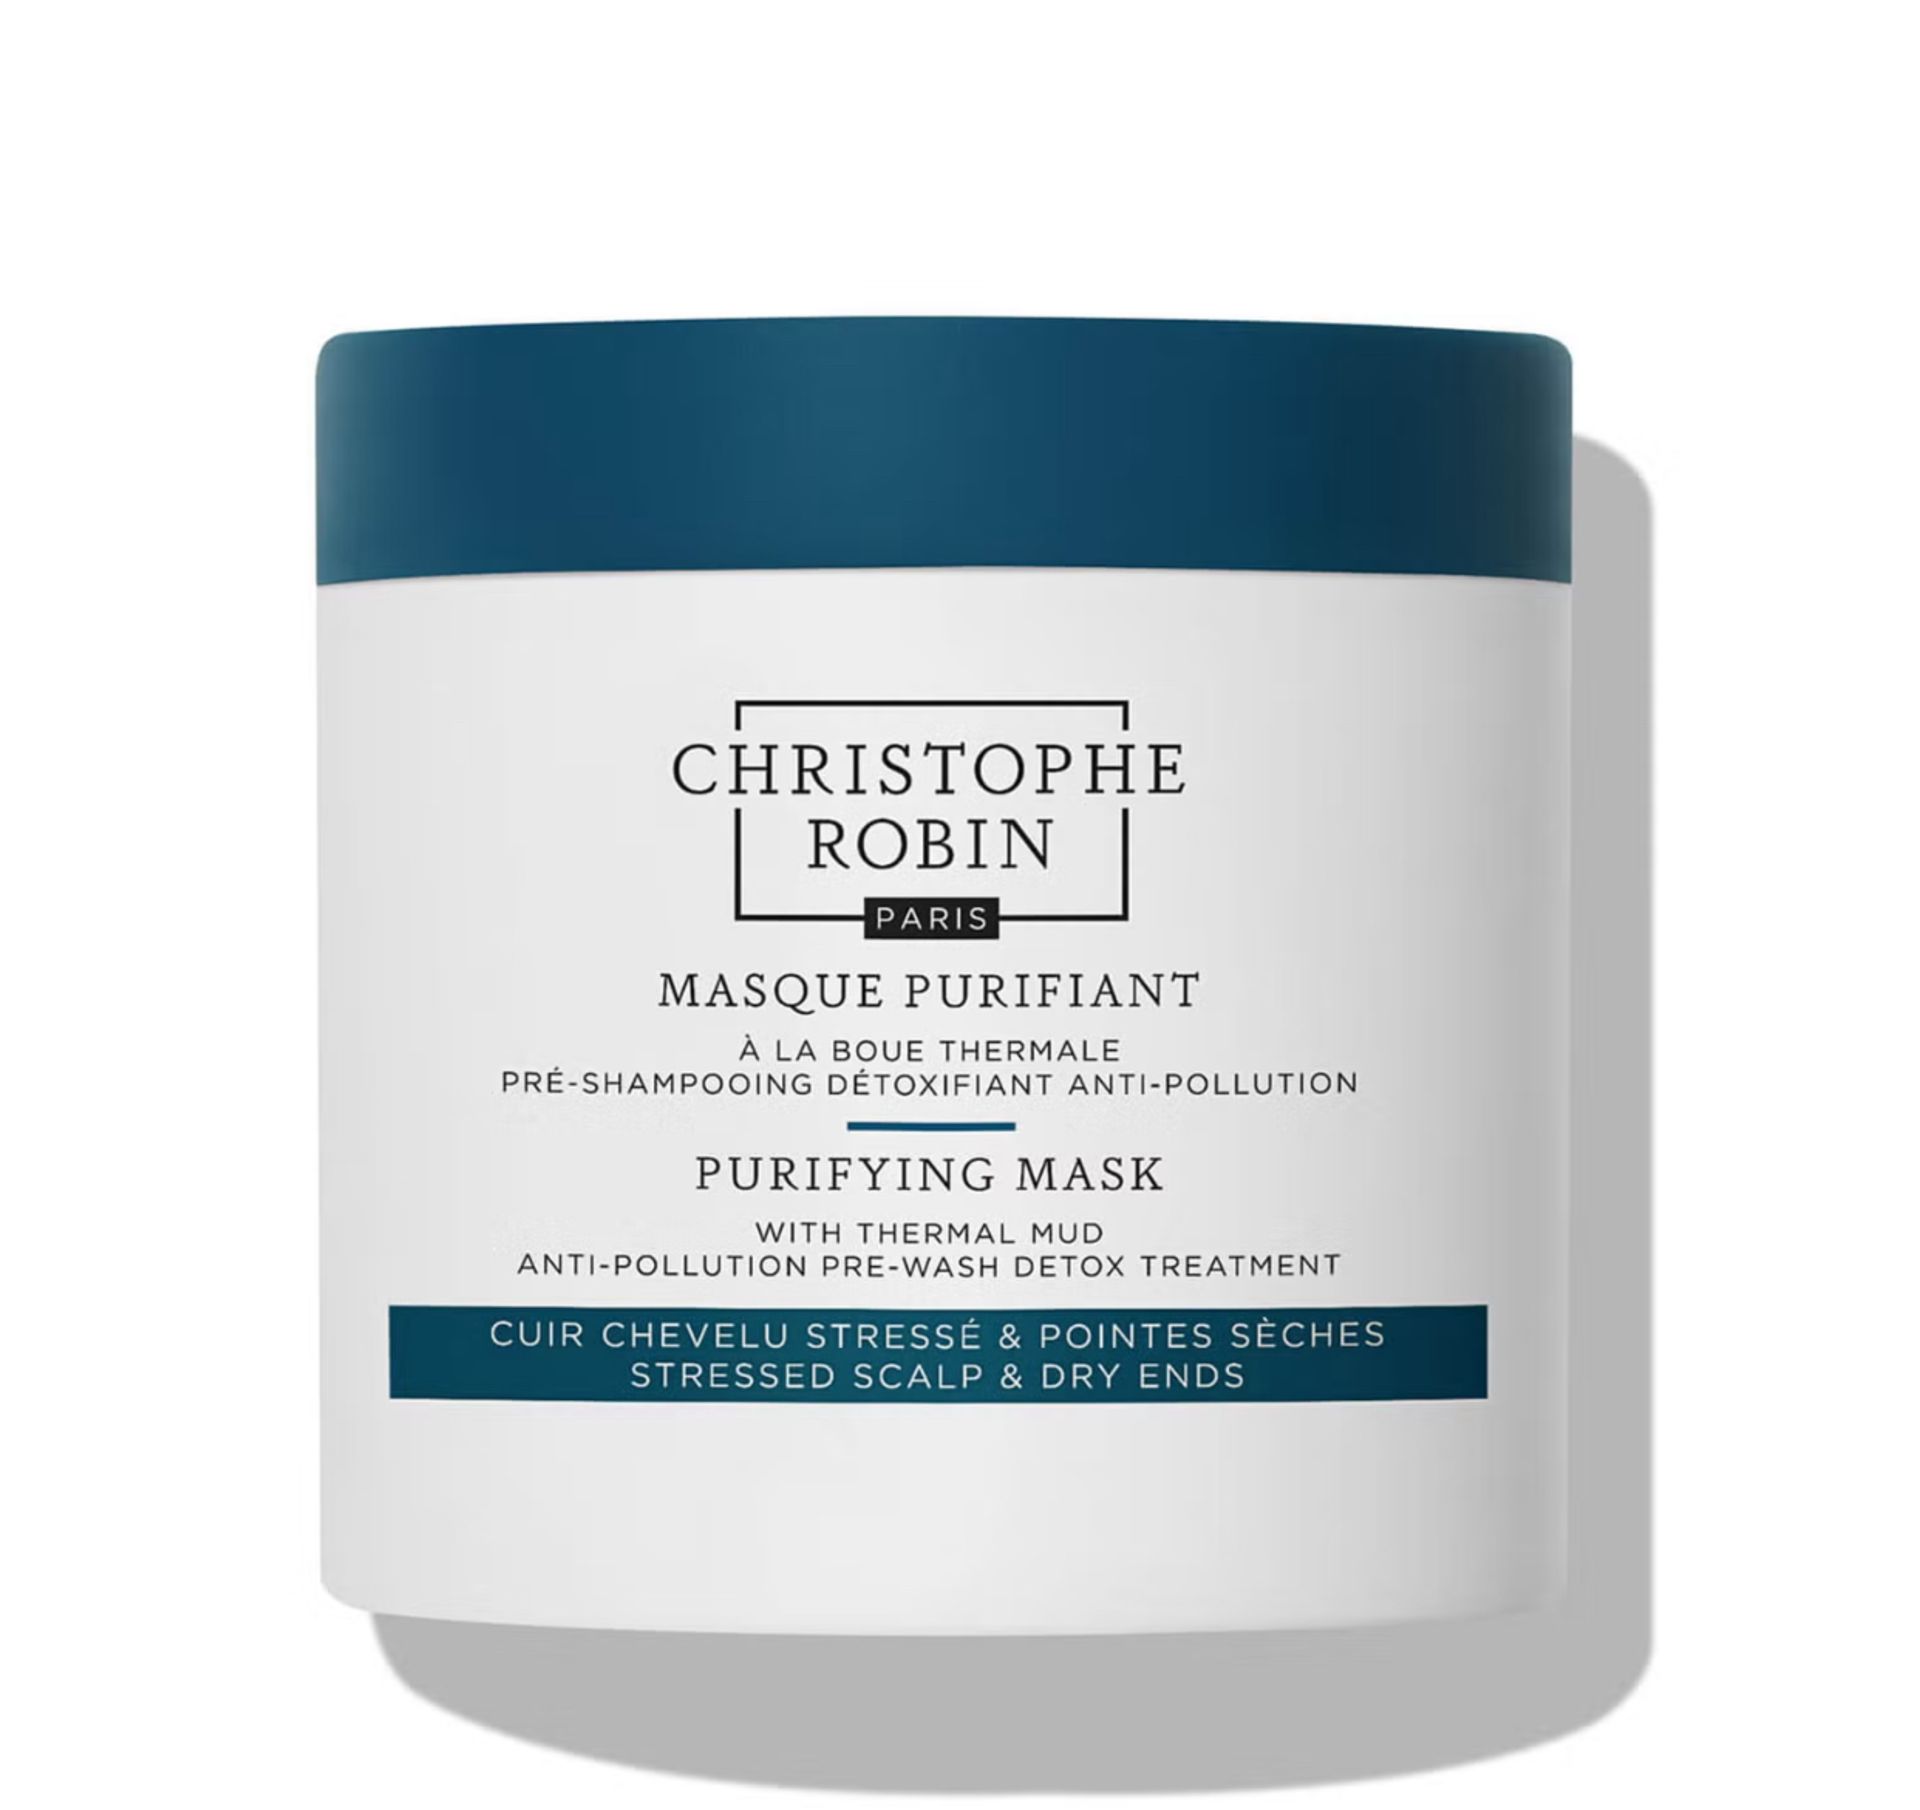 2000 X CHRISTOPHE ROBIN PURIFYING MASK WITH THERMAL MUD 12ML SACHETS RRP£3800